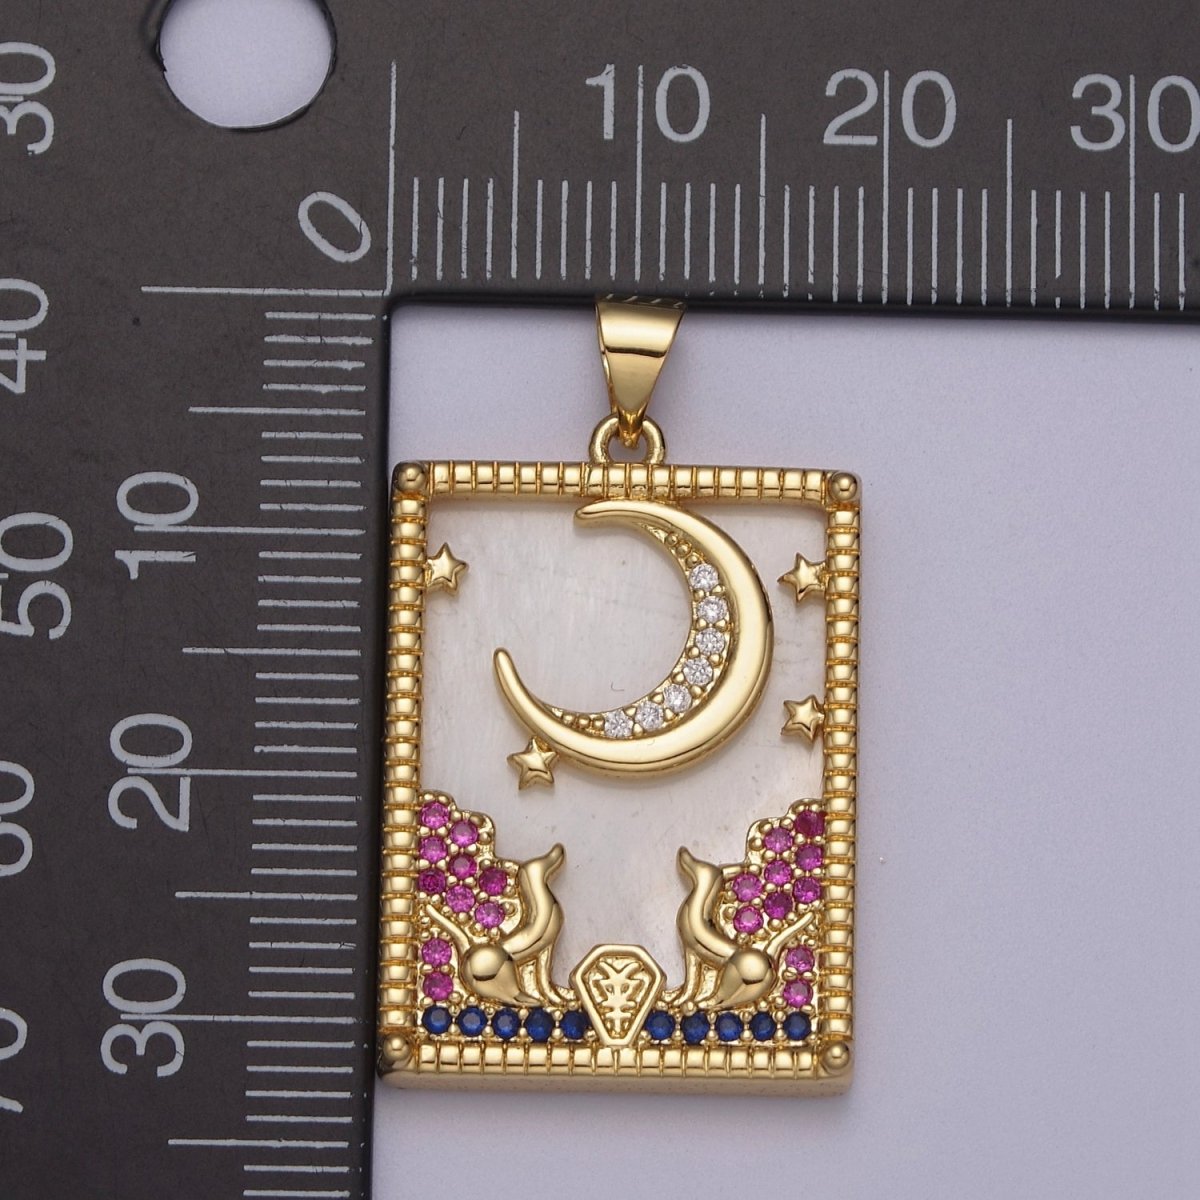 24K Gold Filled Tarot Card Charm - Pearl The Moon Pendant Amulet Jewelry for Necklace Component Supply J-411 - DLUXCA